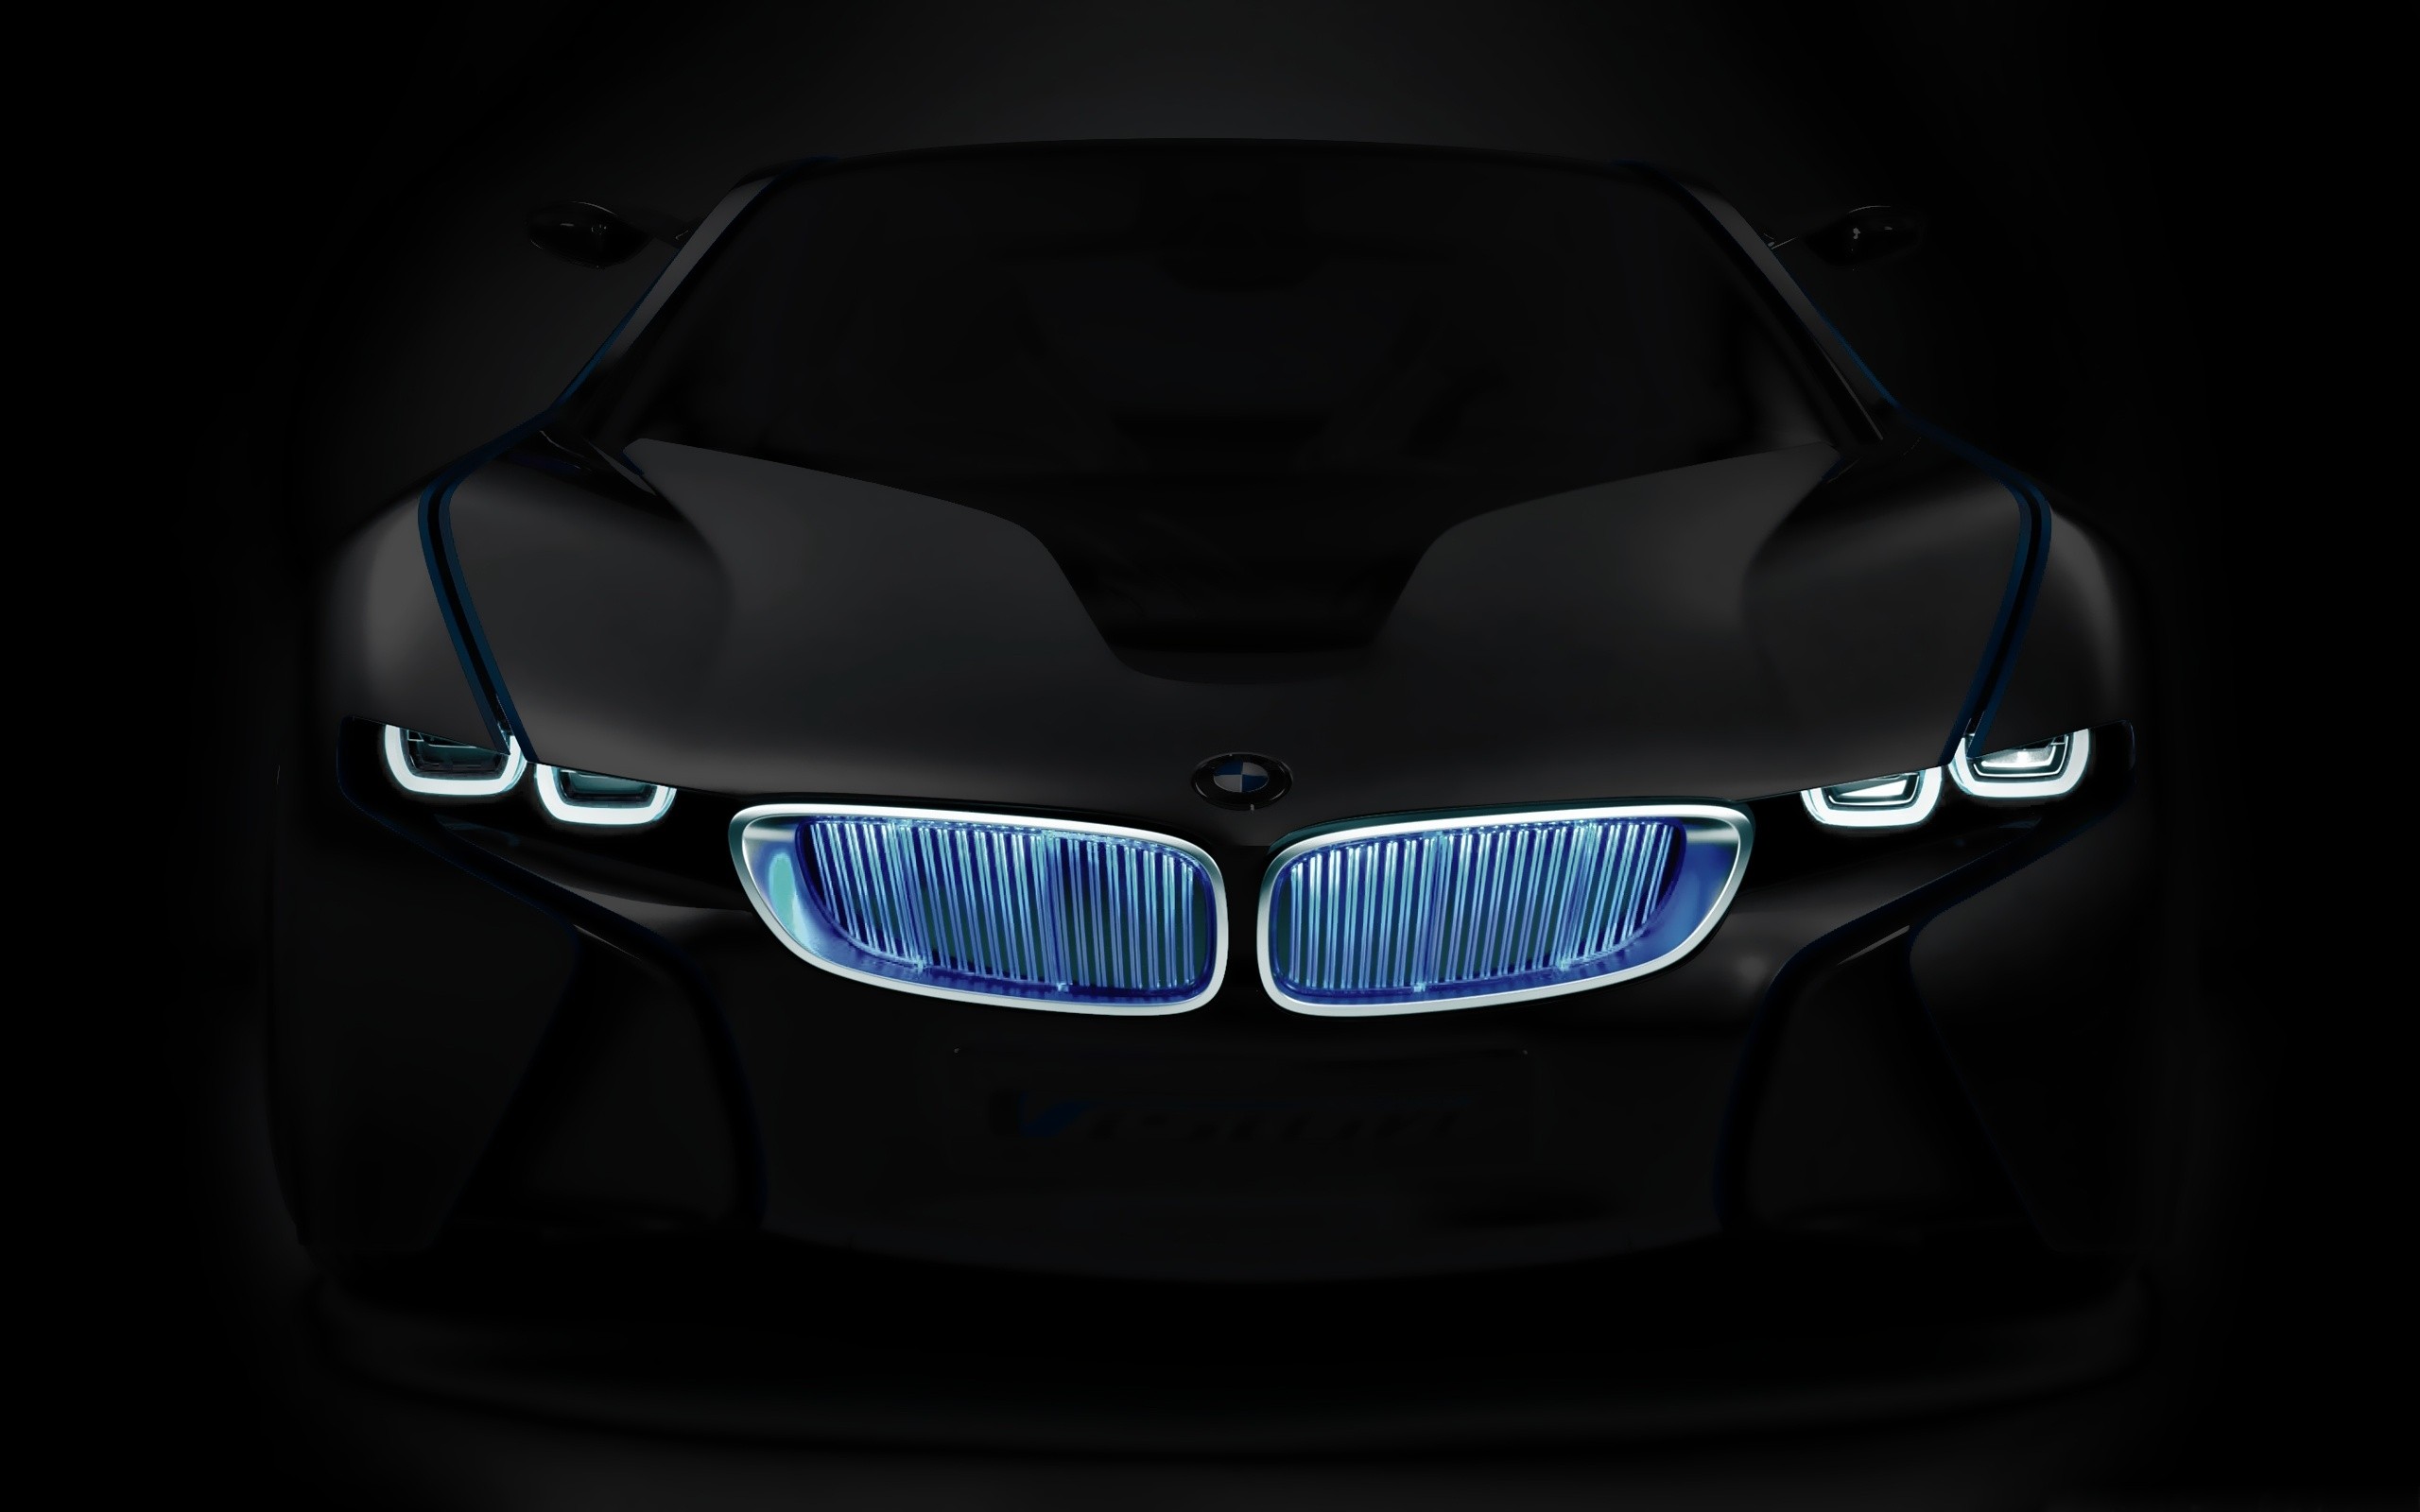 Free Download Bmw Wallpapers Neon Grill Bmw Myspace Backgrounds Neon Grill Bmw 2560x1600 For Your Desktop Mobile Tablet Explore 49 Bmw Background Wallpaper Bmw Cars Wallpapers For Desktop Bm